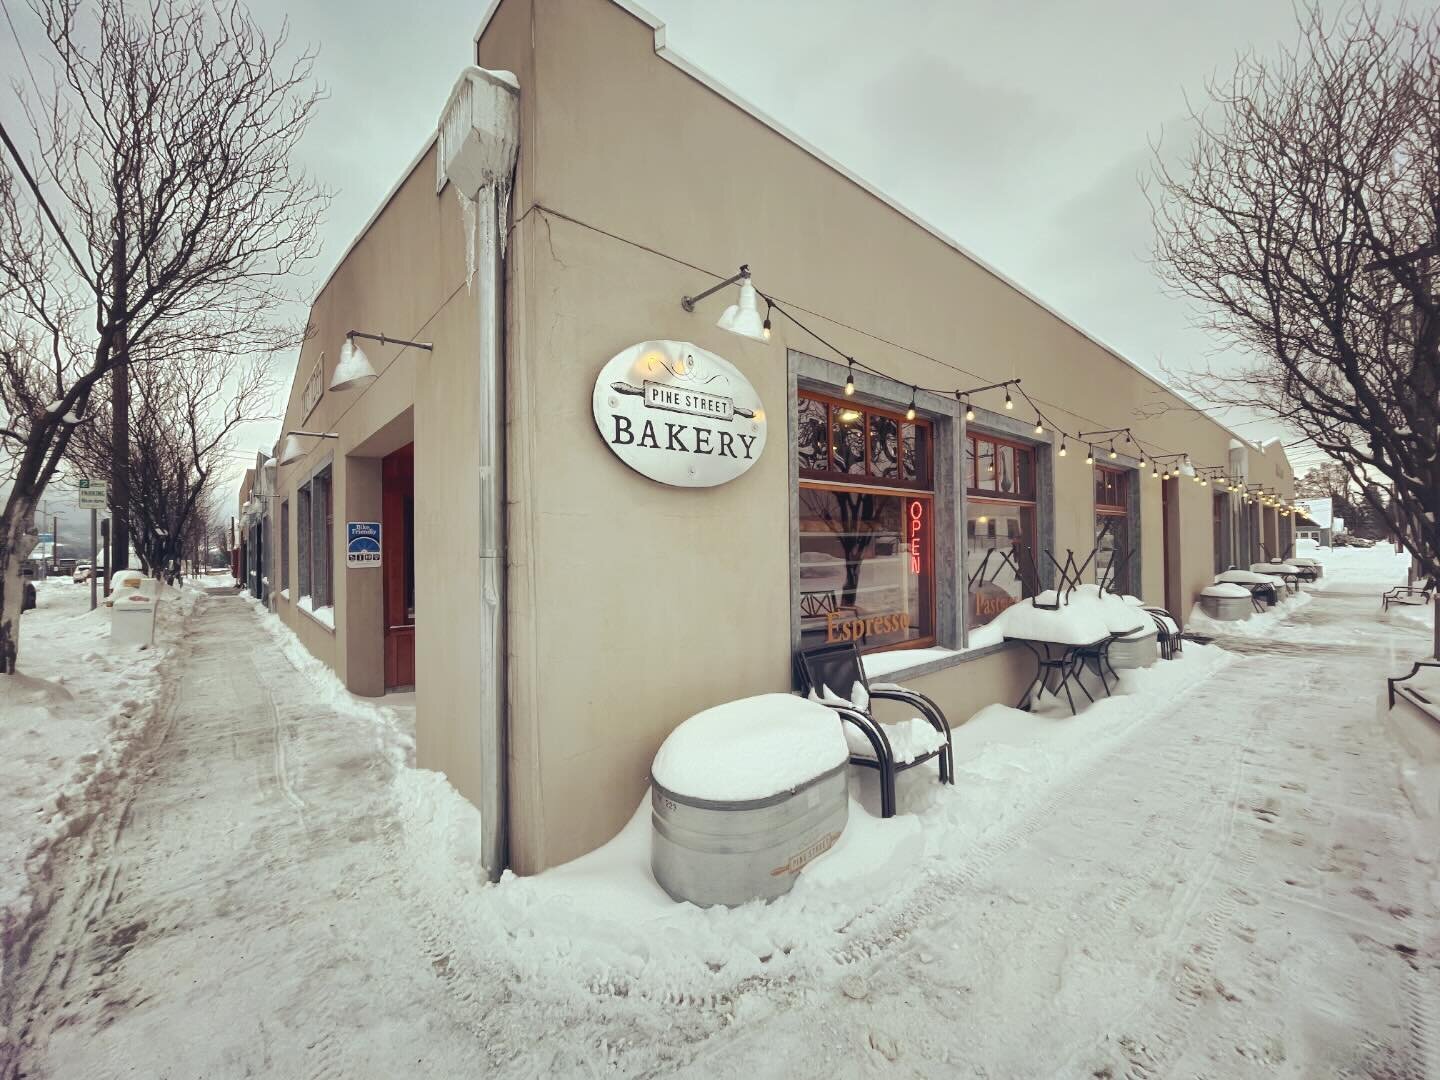 WE ARE OPEN TODAY (7am-3pm) with full menus available! Stay safe and enjoy this snow day!!

#snow #snowday #winter #winterwonderland #bakery #bakeies #bakerlife #bakeriesofinstagram #bakedgoods #pastries #pastry #hoodriver #hoodriveroregon #oregon #p